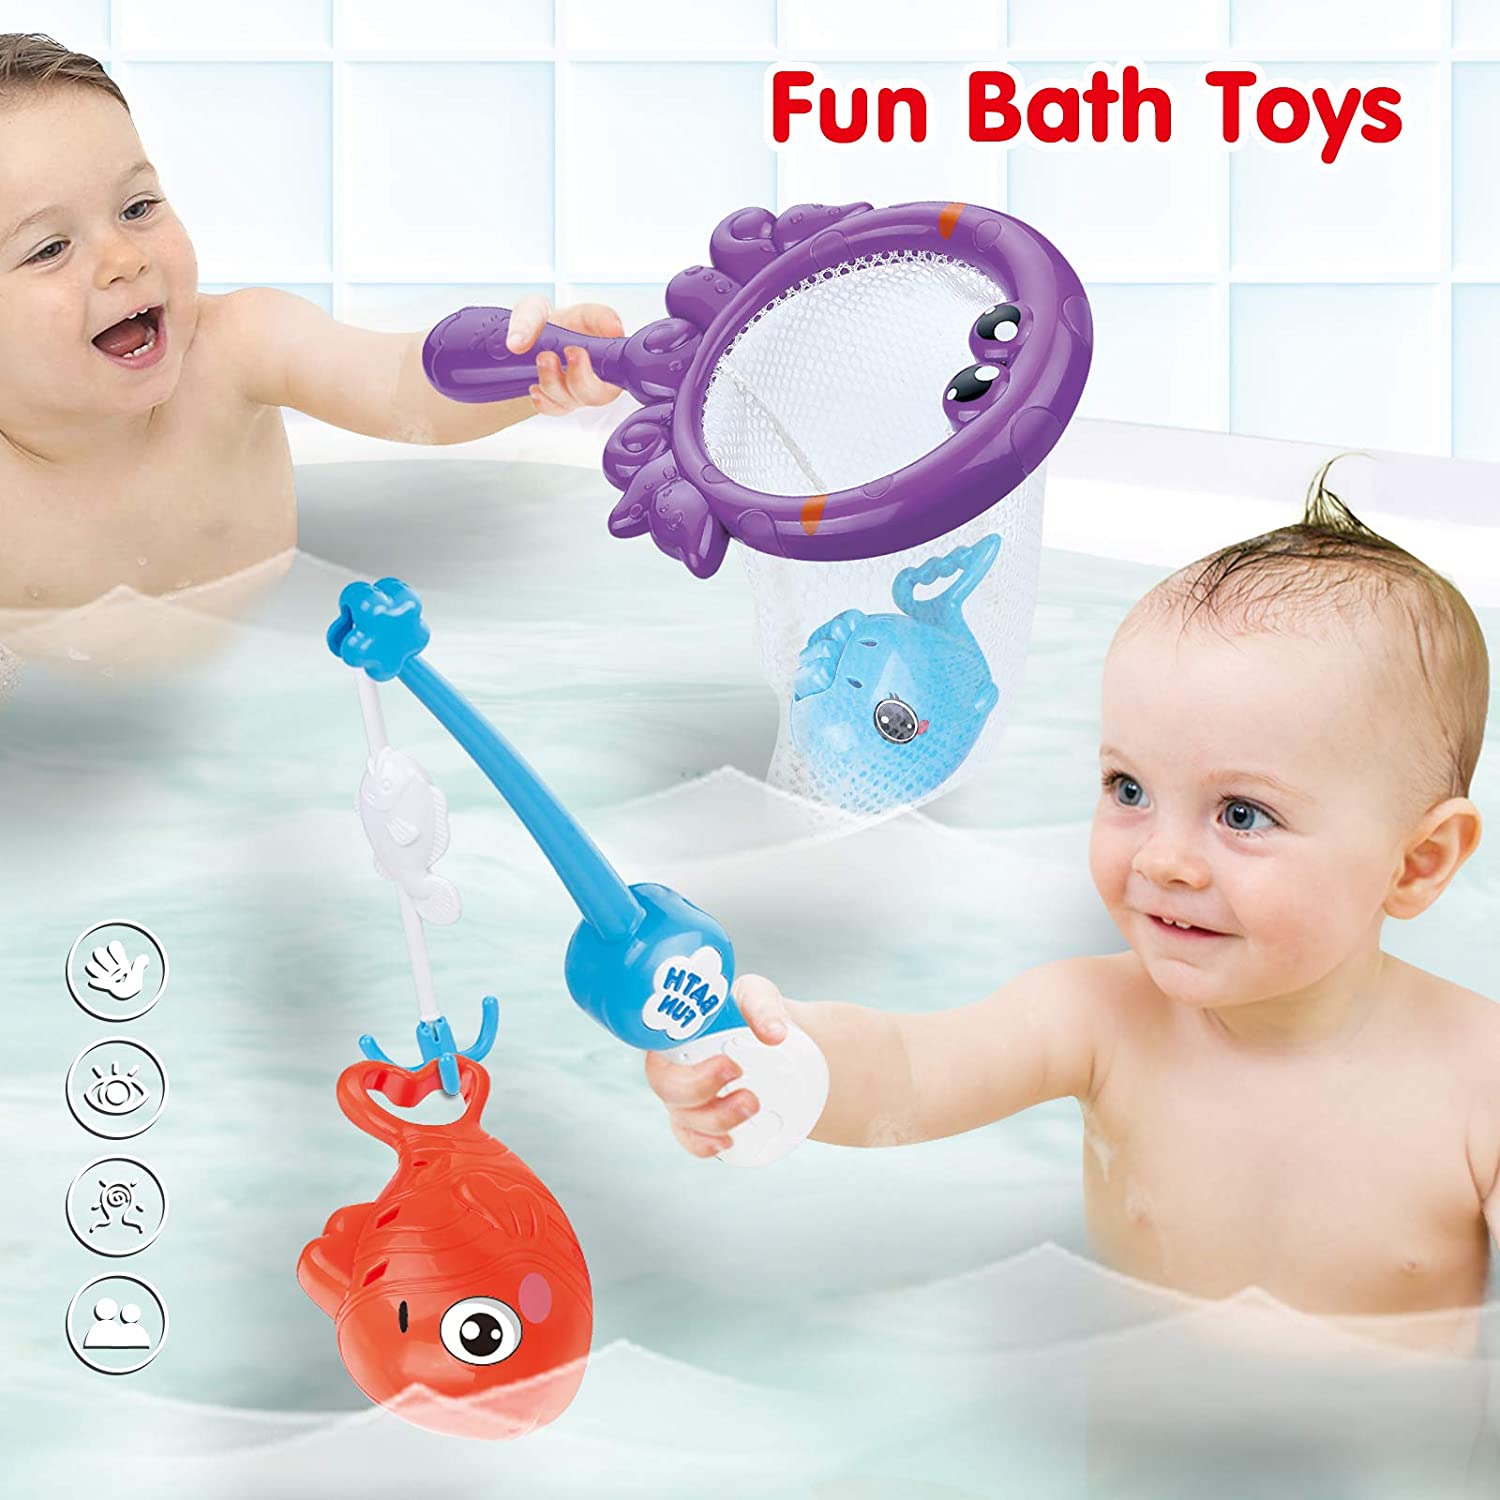 Baby Bath Fishing Toys， Bathtub Pool Toys Set with Fishing Pole and Net， Bath Toys for 1 Year Old Toddler Boys Girls